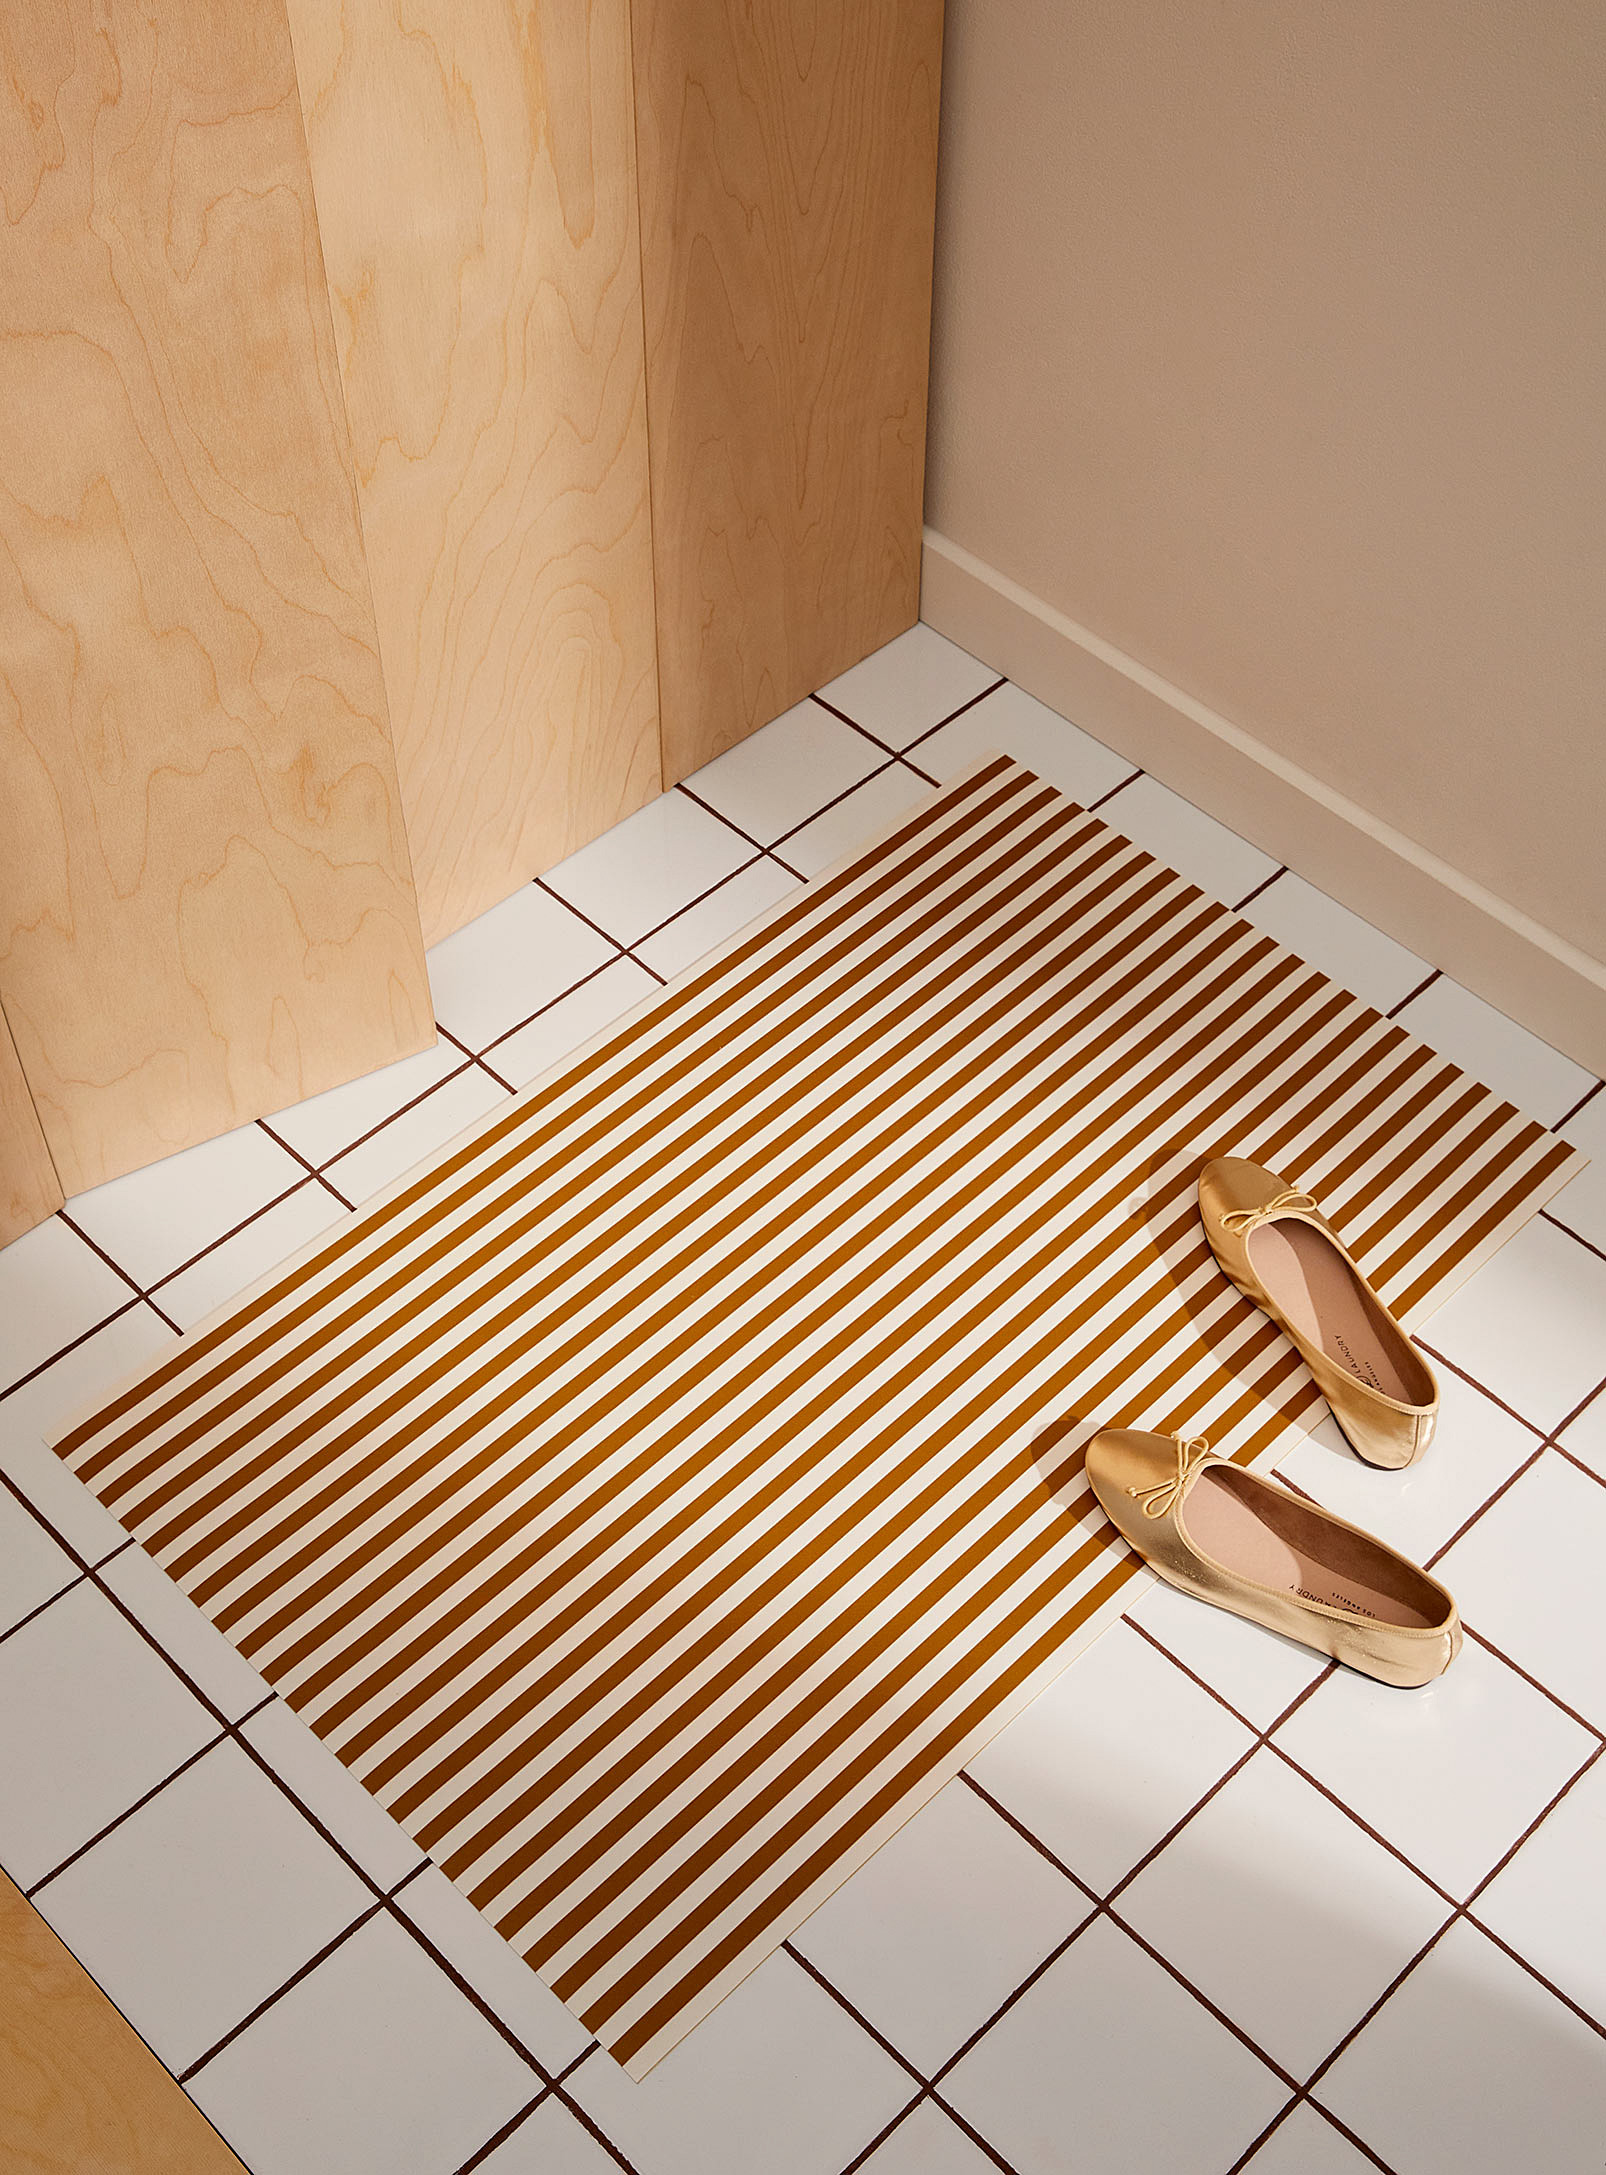 Adama Caramel Stripes Vinyl Mat See Available Sizes In Ivory/cream Beige